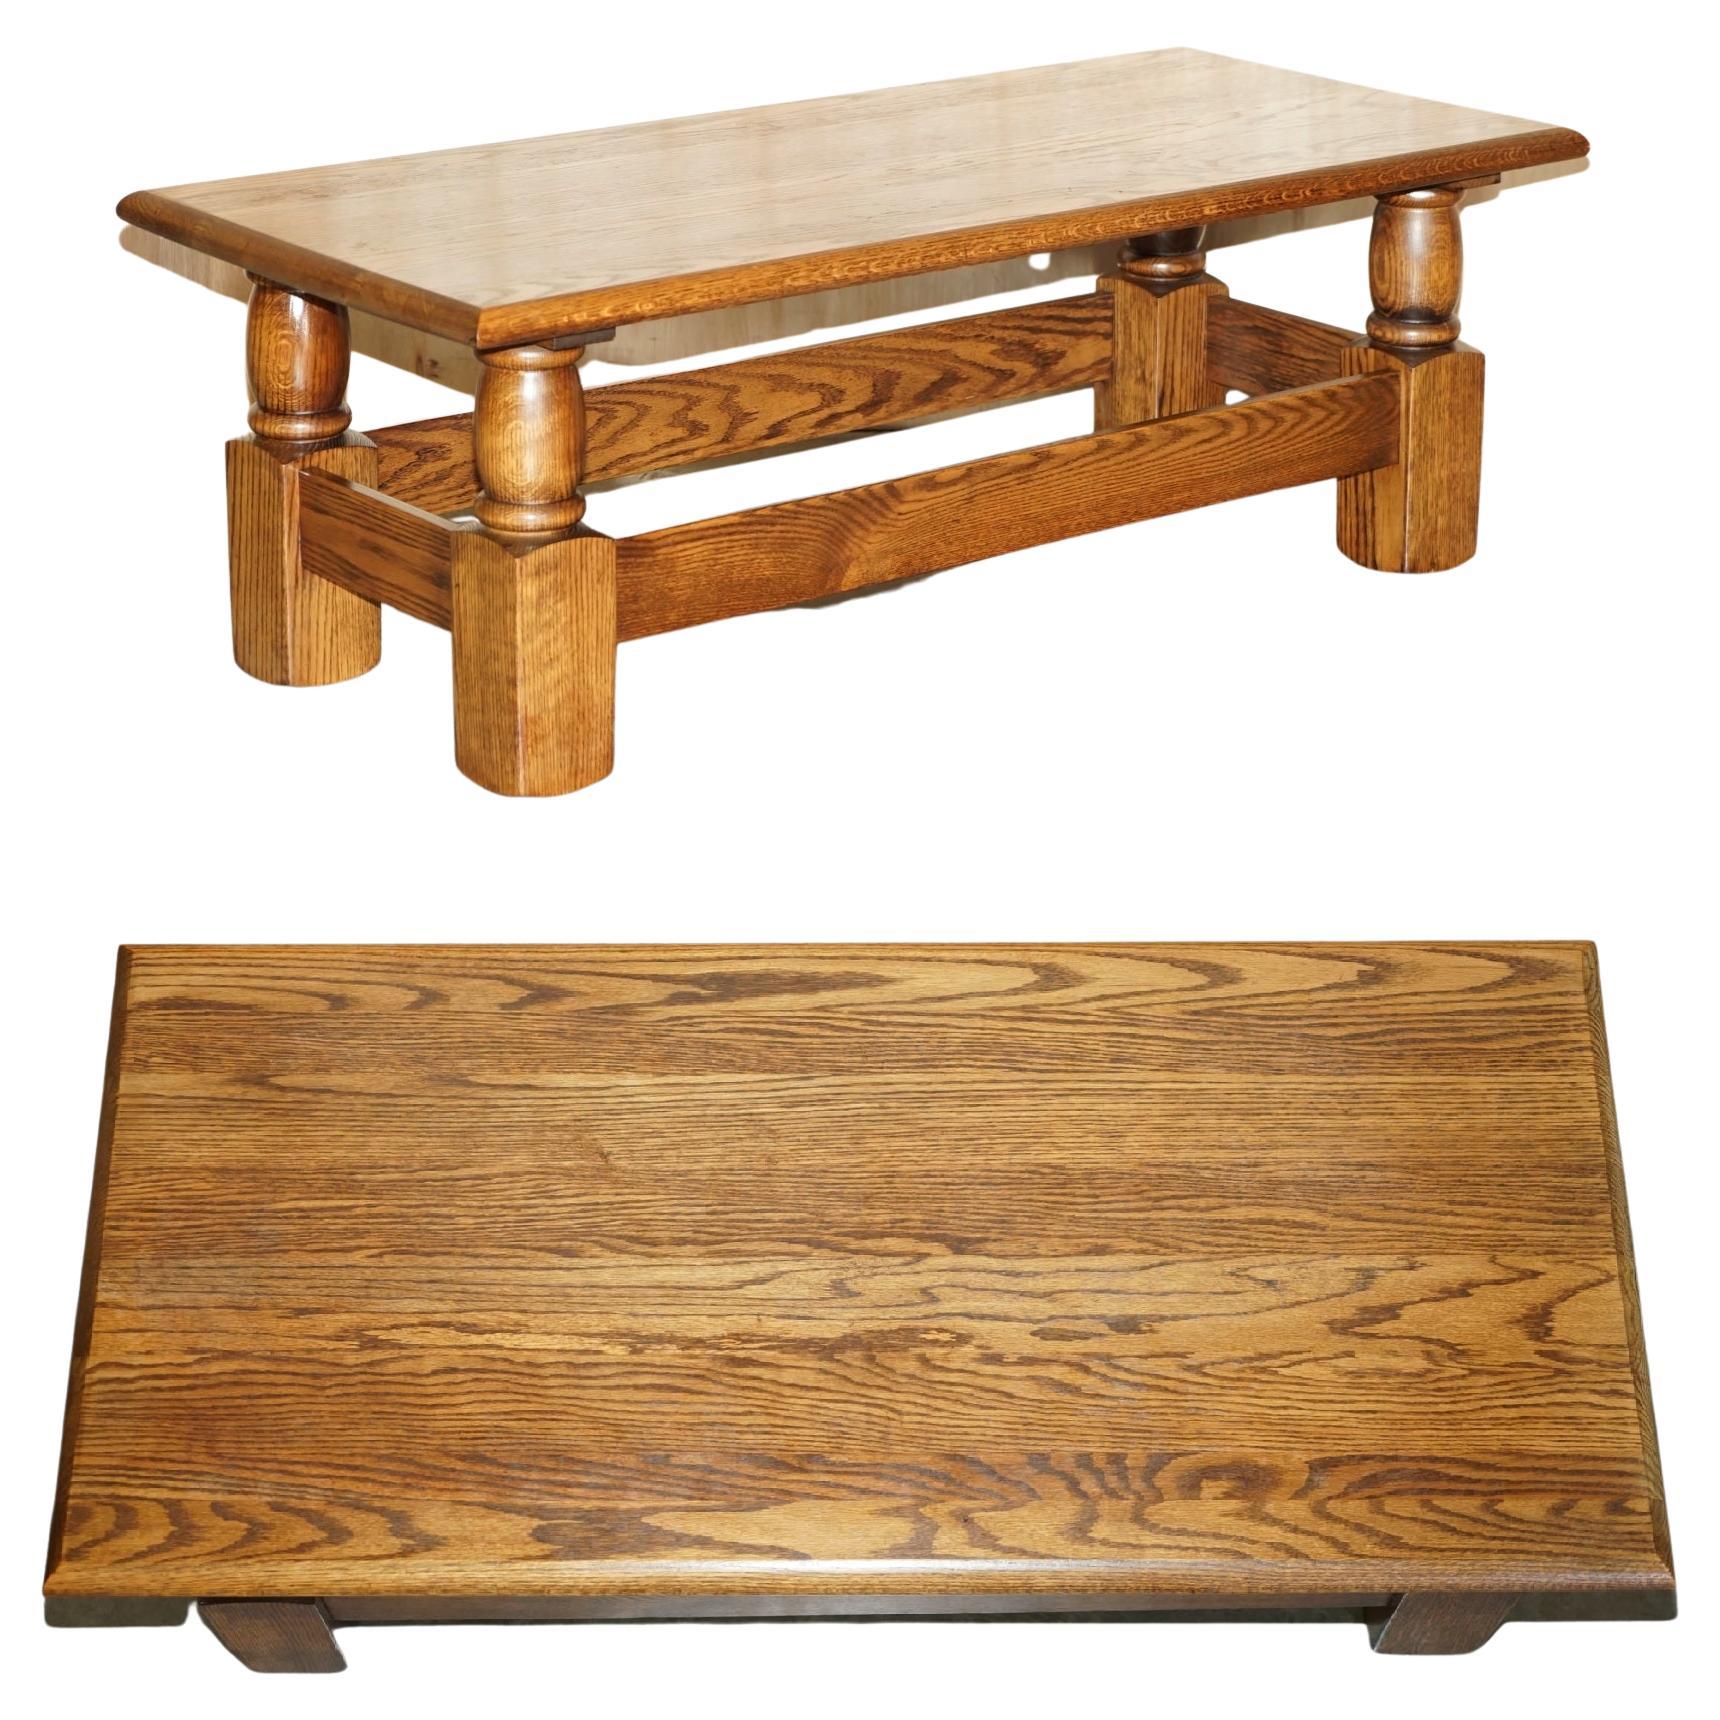 Vintage English Oak Coffee Table Made in the Style of Edwardian Refectory Tables For Sale